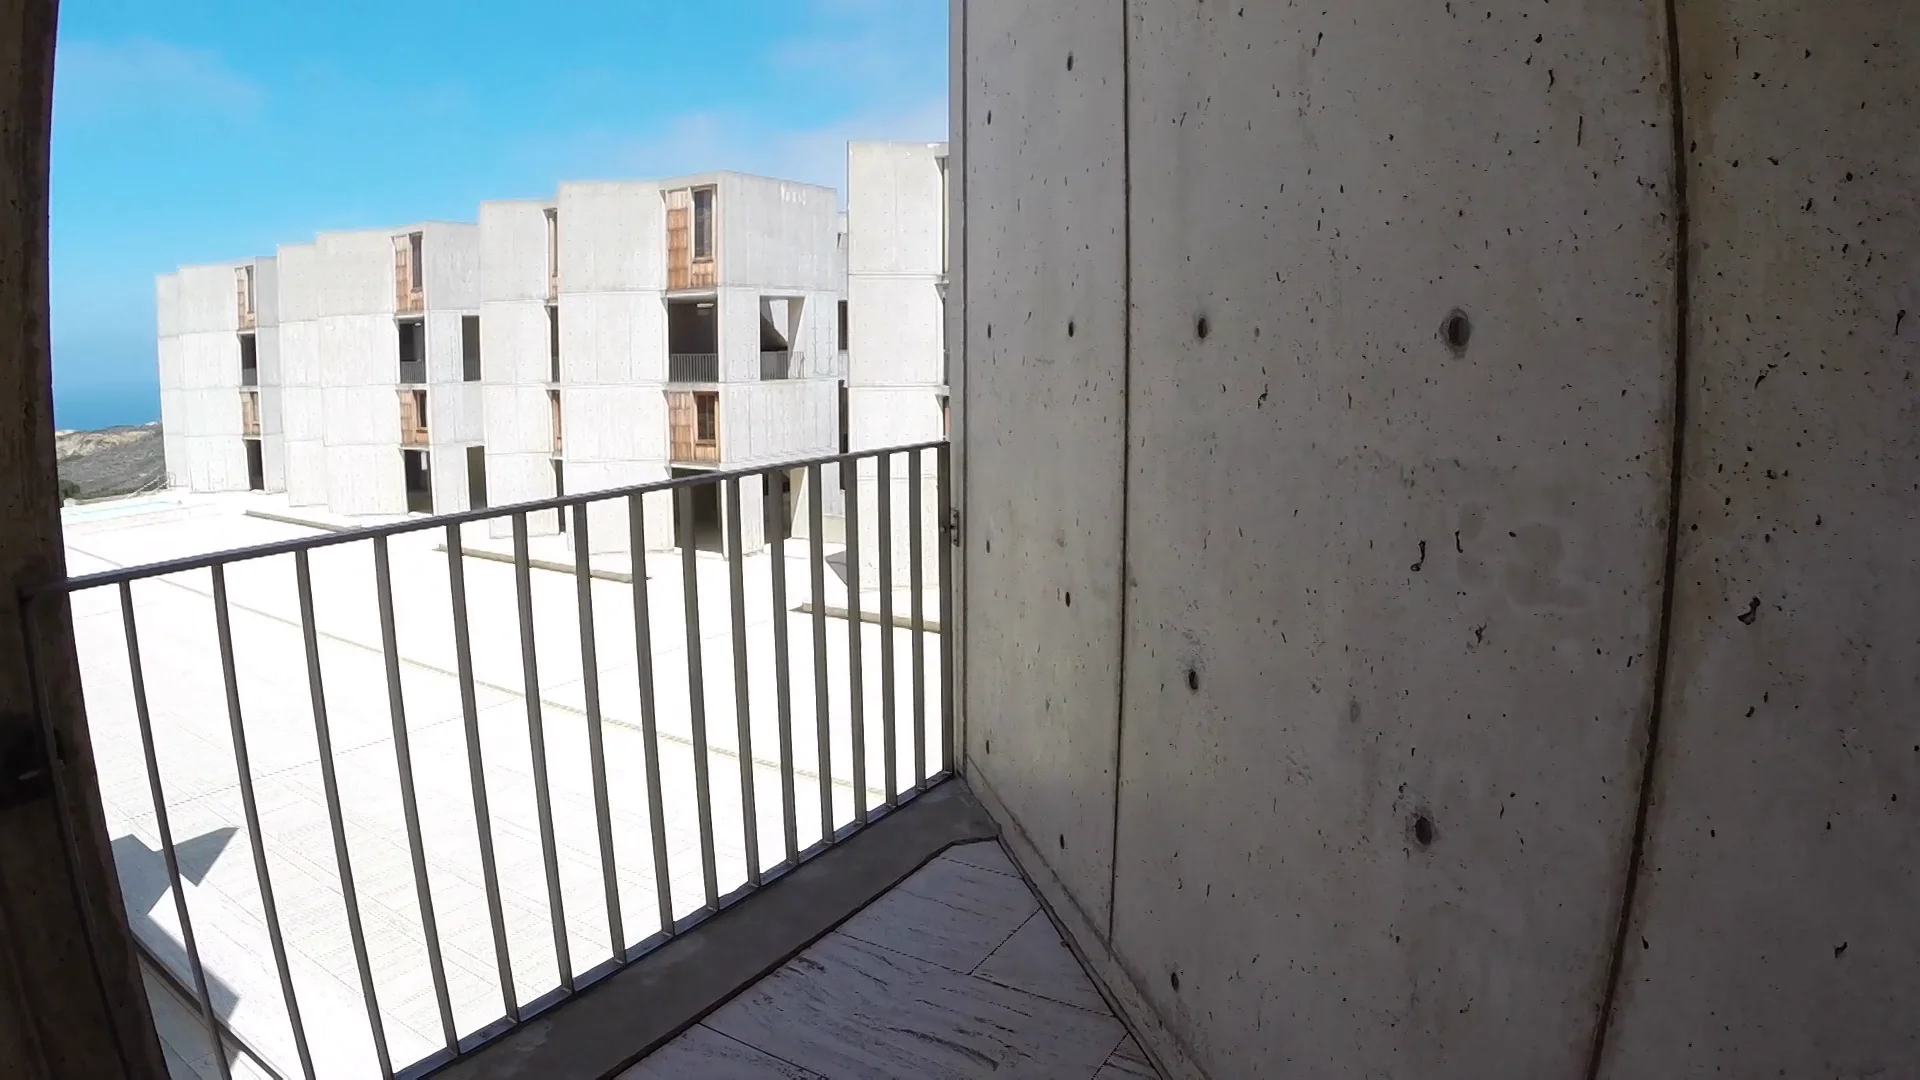 Day37 - Salk Institute / How to draw Architectures 